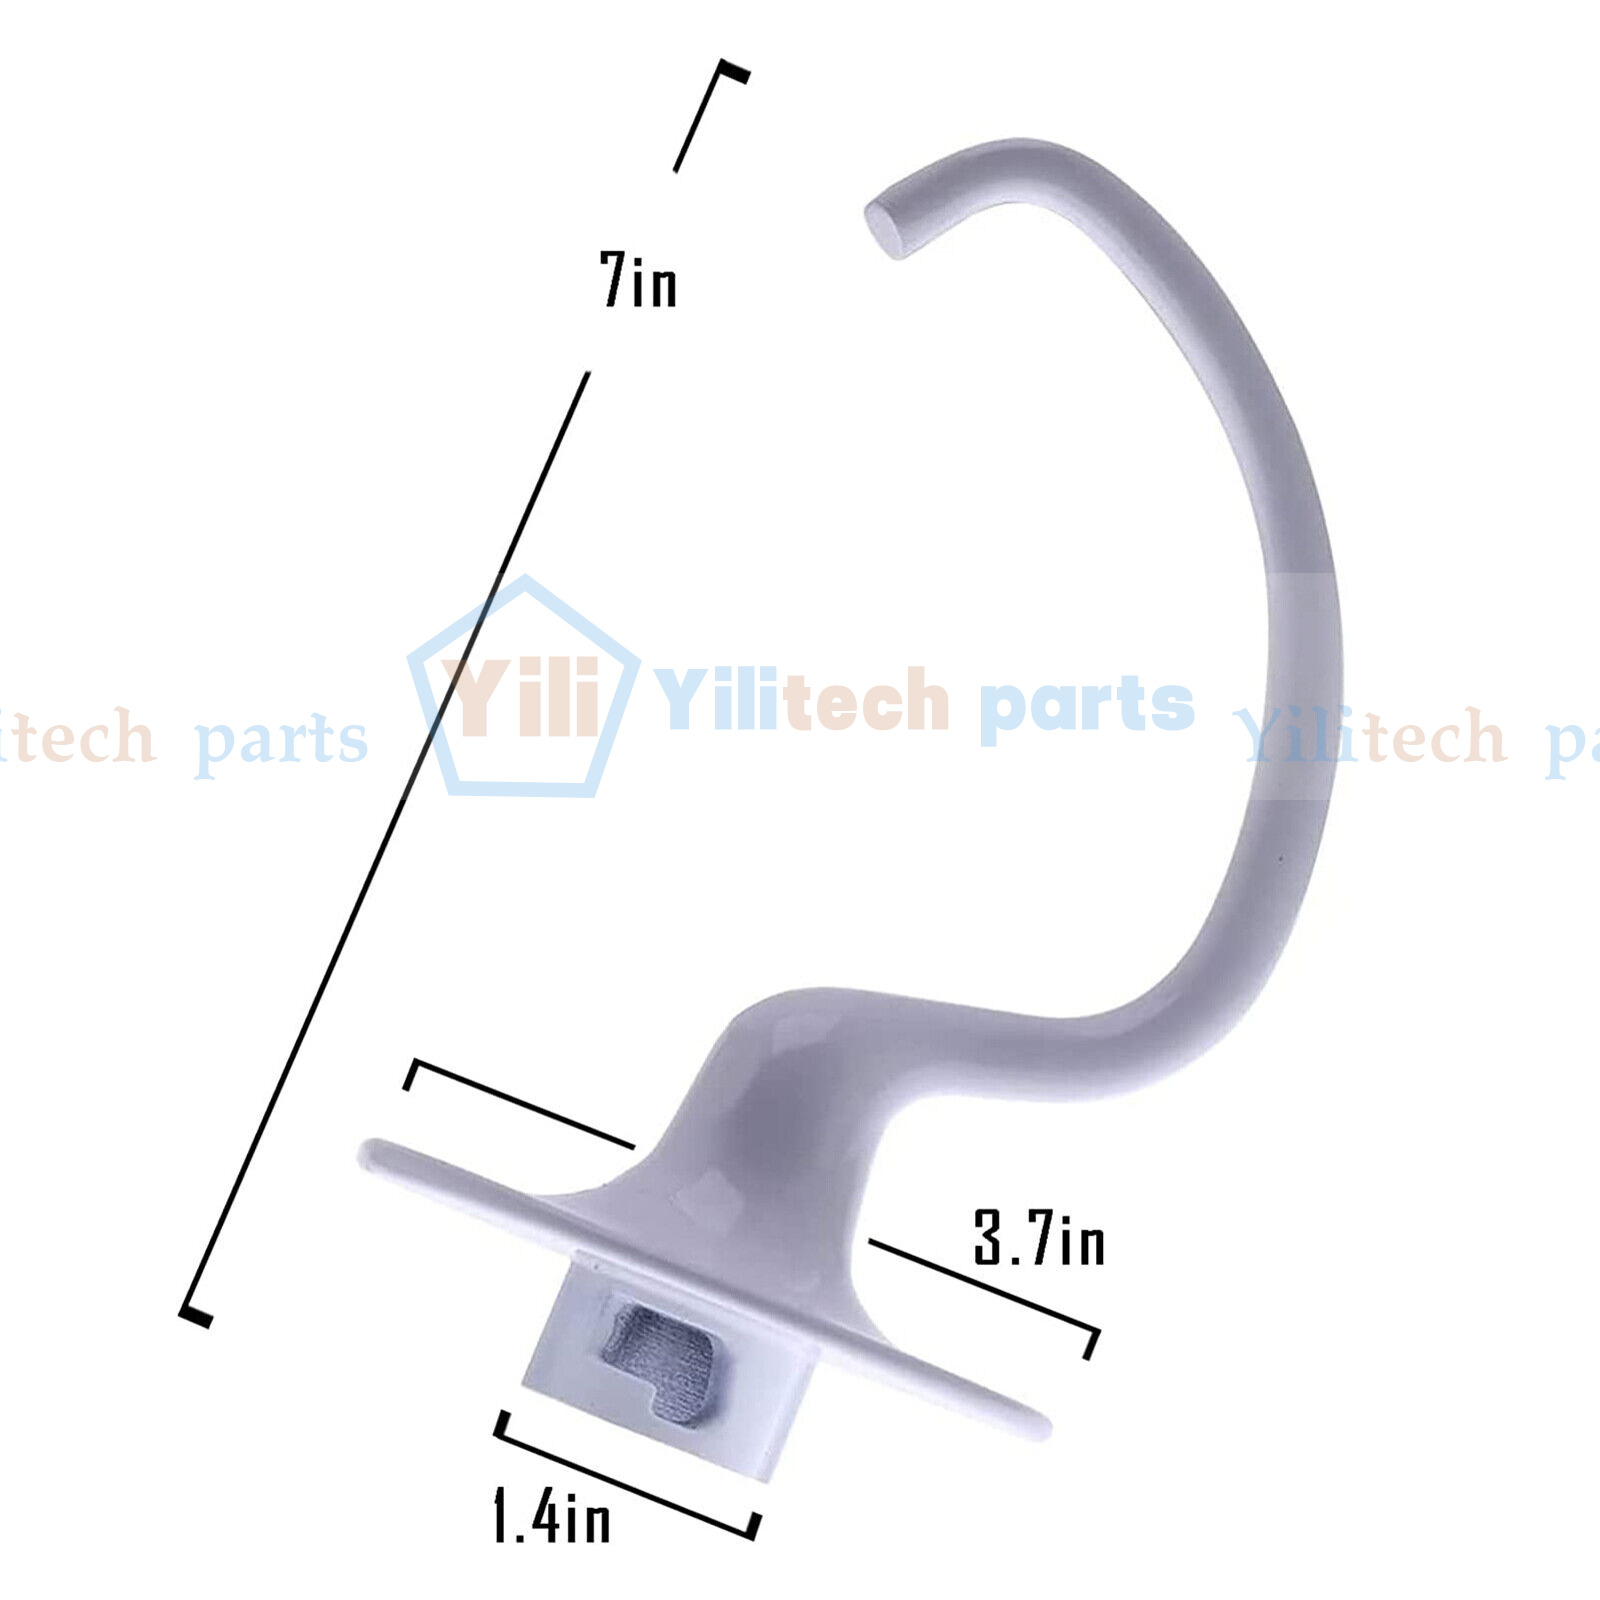 Coated Anti-stick Mixer Dough Hook K5ADH Replacement for KitchenAid Stand Mixer